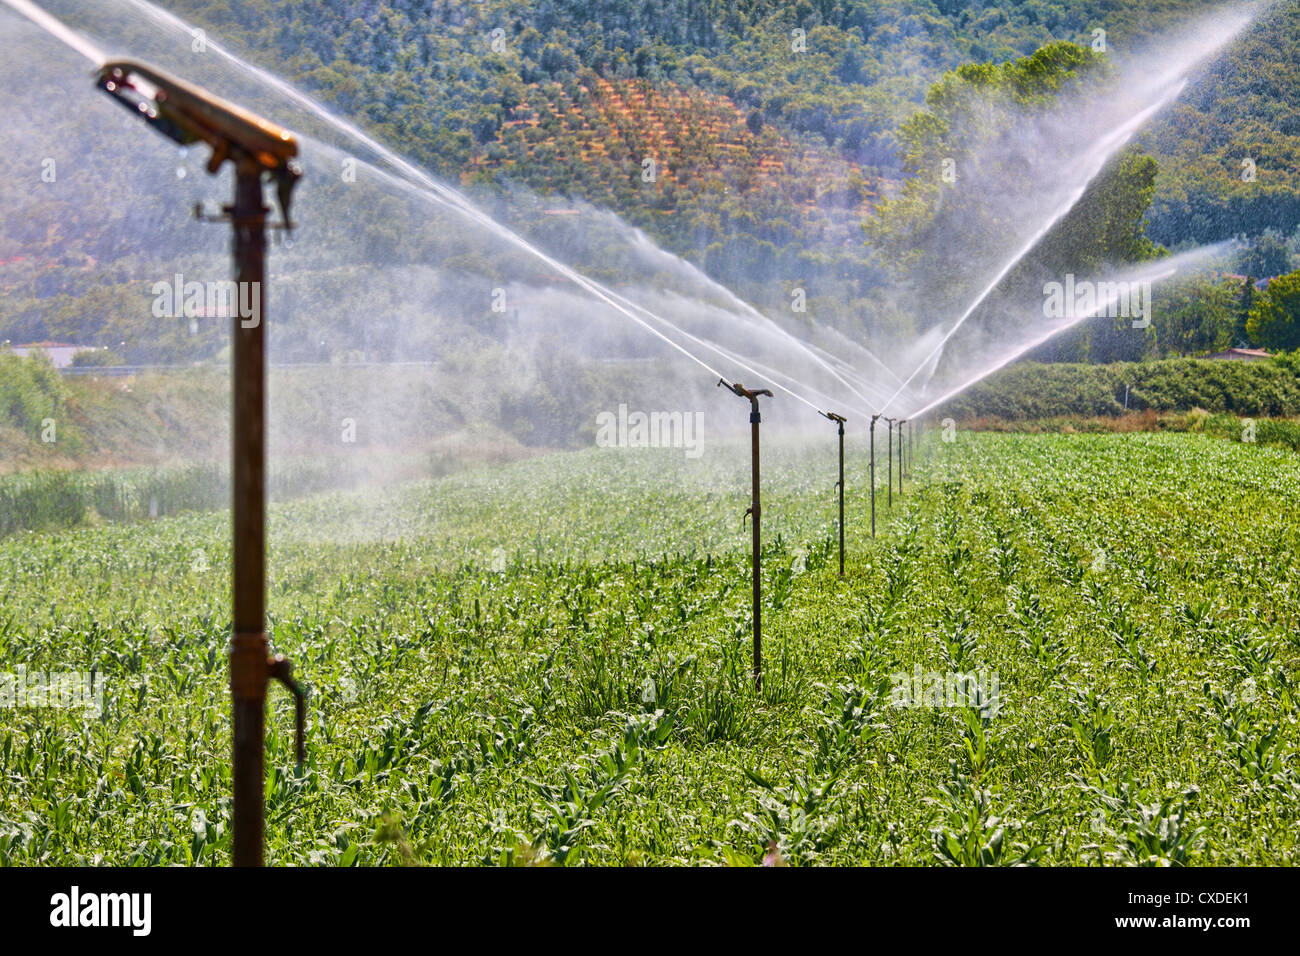 Irrigation system working on a farm Stock Photo